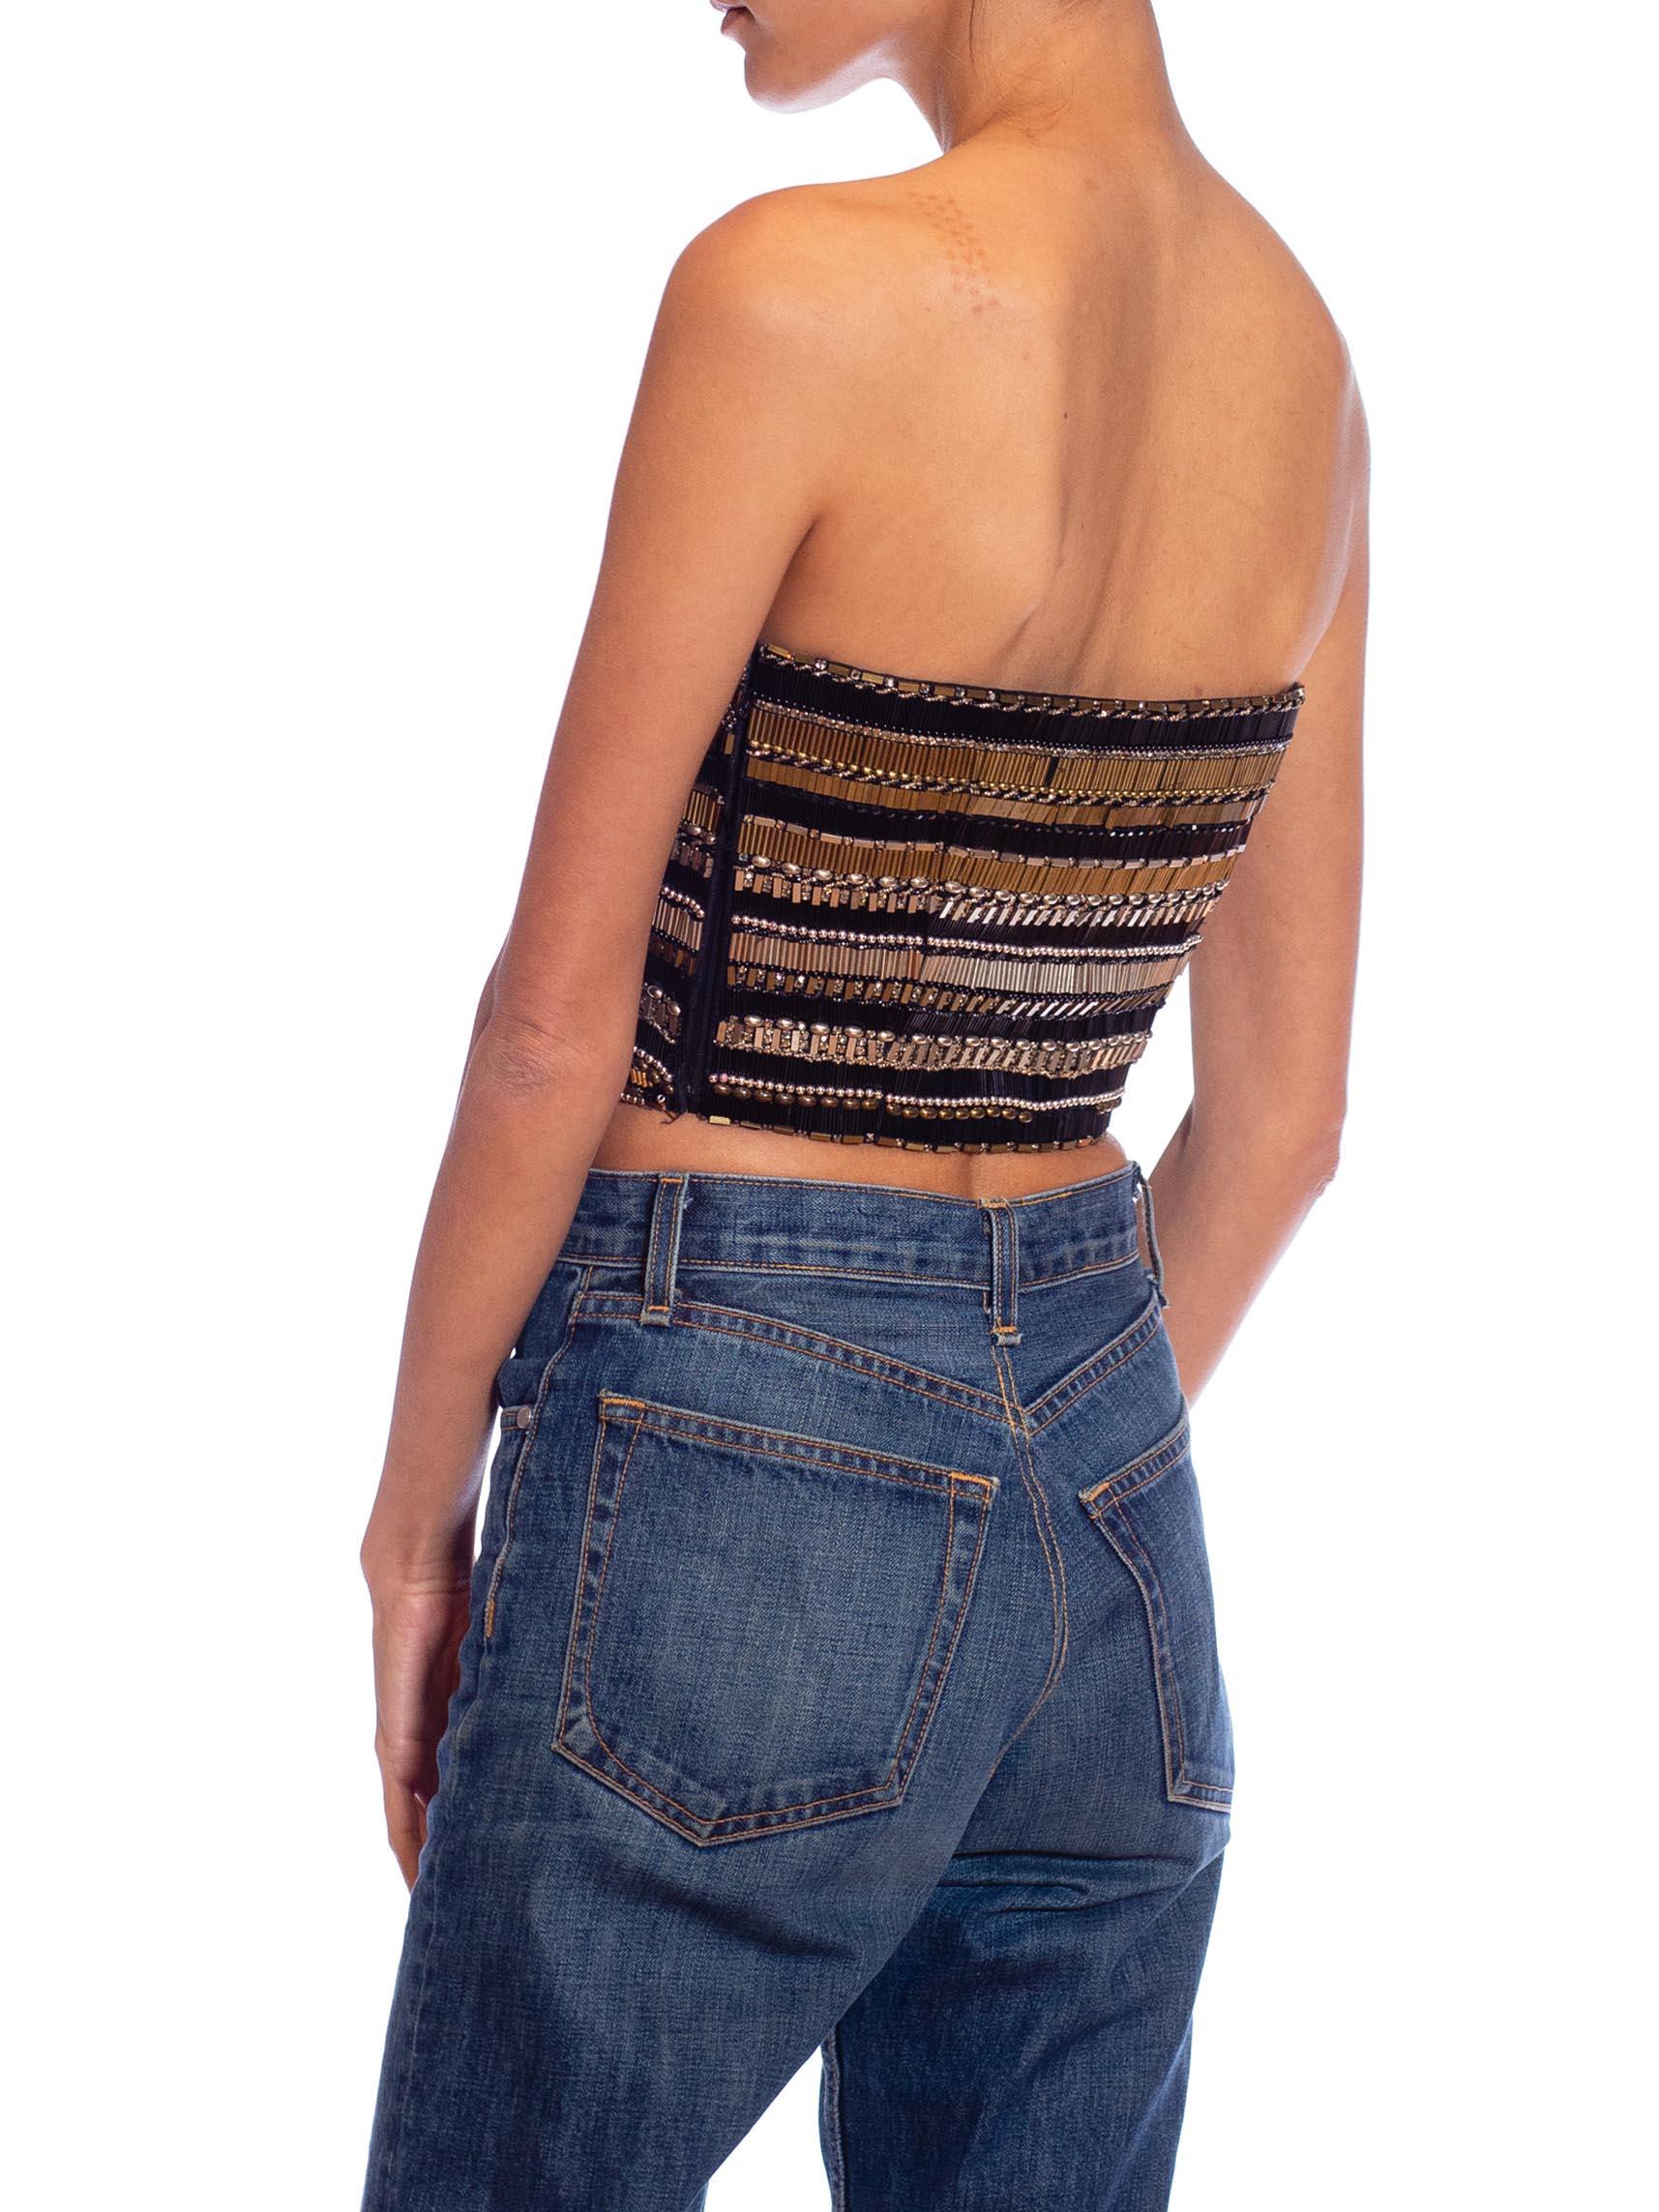 1990S GIANNI VERSACE Black, Silver & Gold Beaded Silk Strapless Bustier For Sale 1